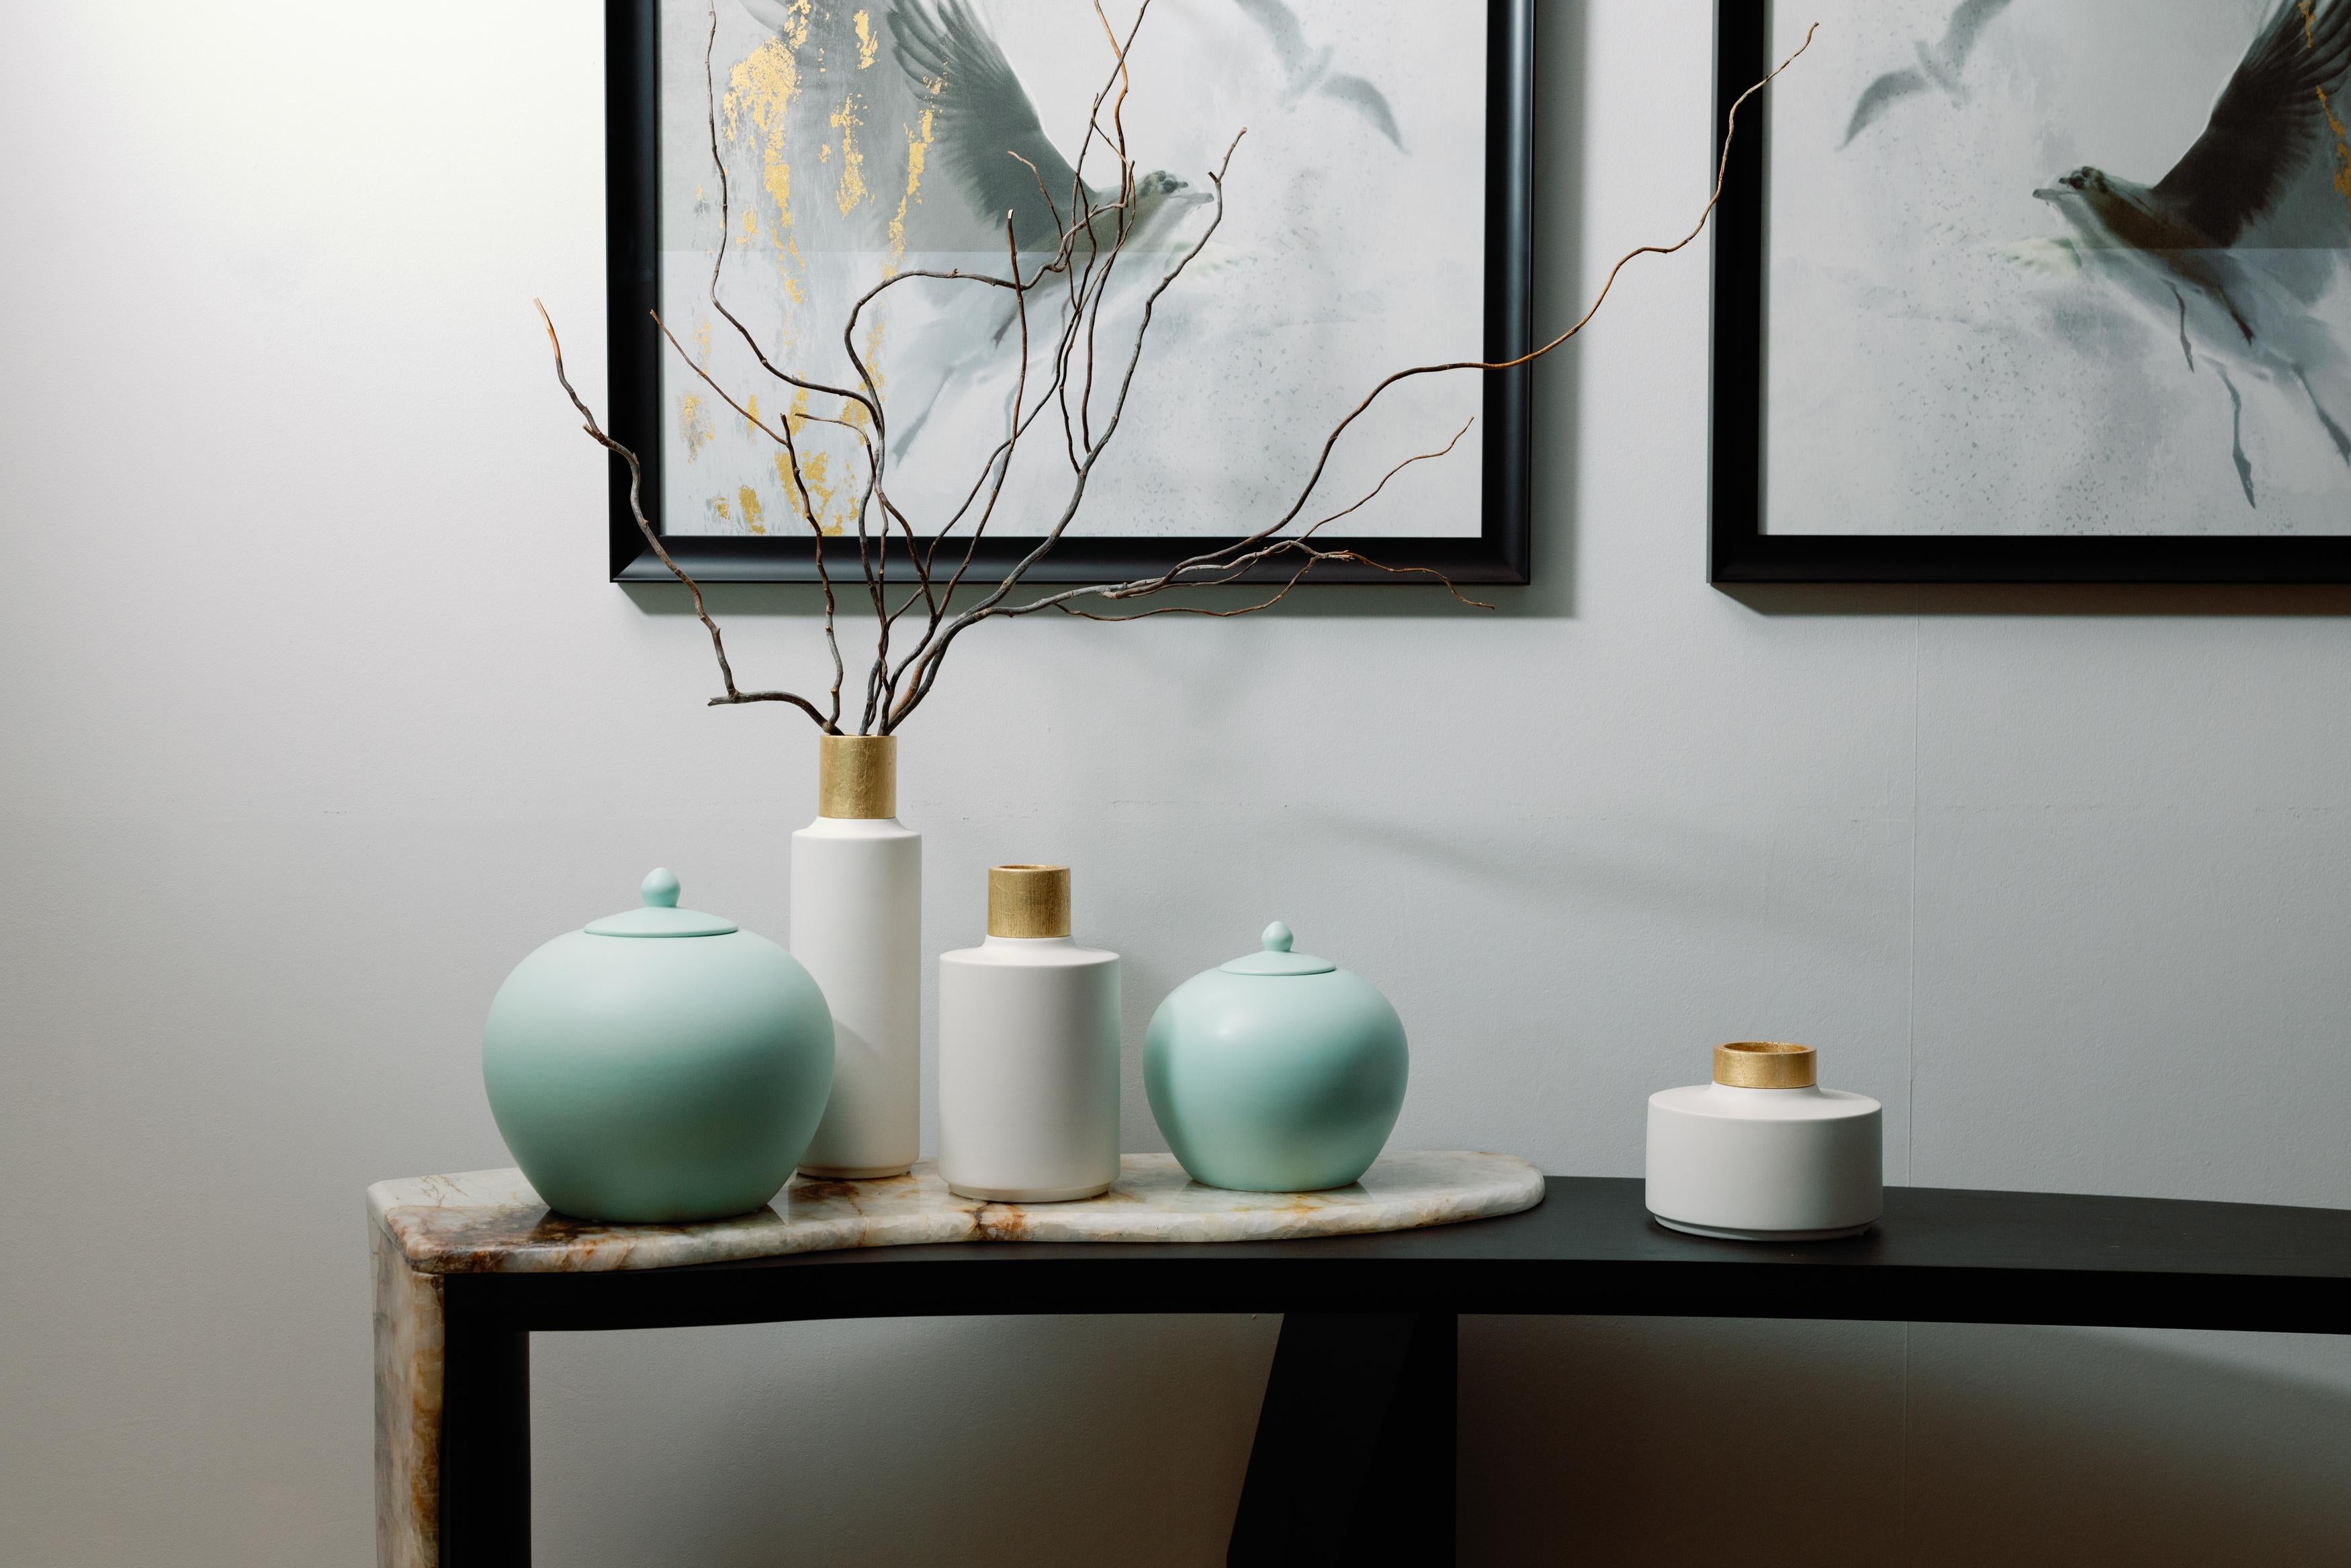 Set/5 Ceramic Jars & Pots, Lusitanus Home Collection, Handcrafted in Portugal - Europe by Lusitanus Home.

This beautiful set includes three waterproof ceramic jars and two ceramic pots with lid, perfect to be displayed together in endless